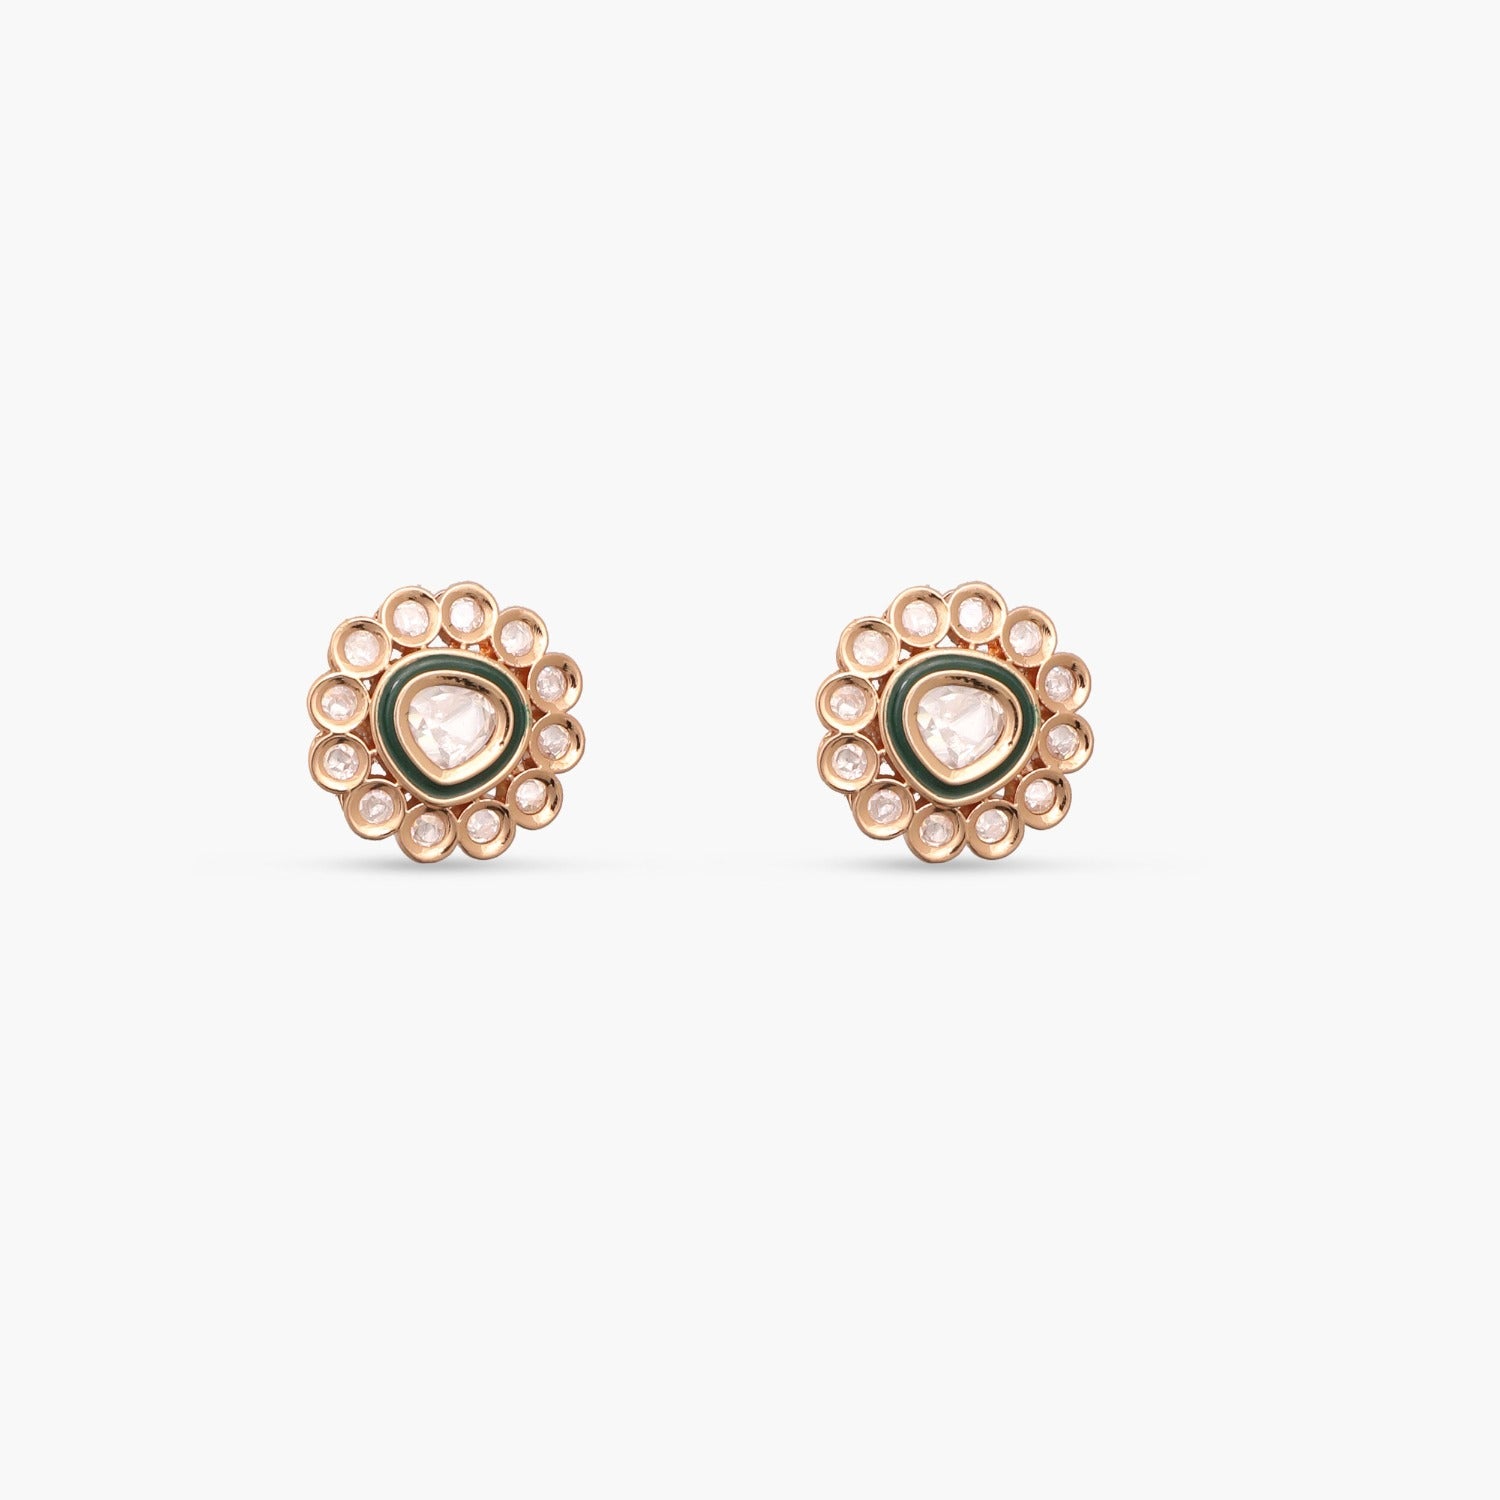 3 Grams Gold Earrings New design Model - from GRT Jewellers | Gold earrings  models, Simple gold earrings, Gold earrings with price